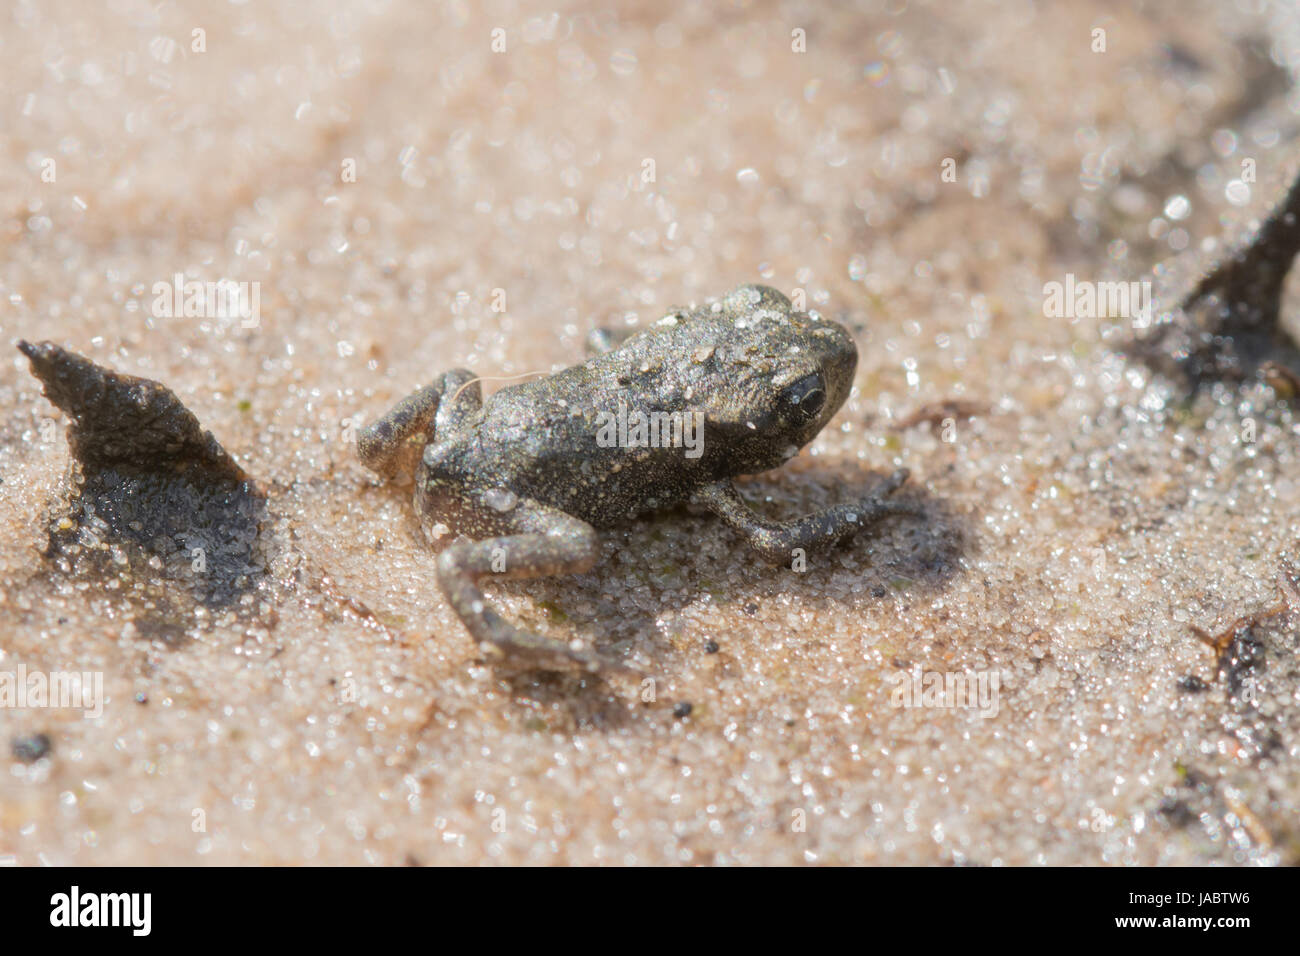 Close-up of common toadlet (Bufo bufo) at edge of pond Stock Photo